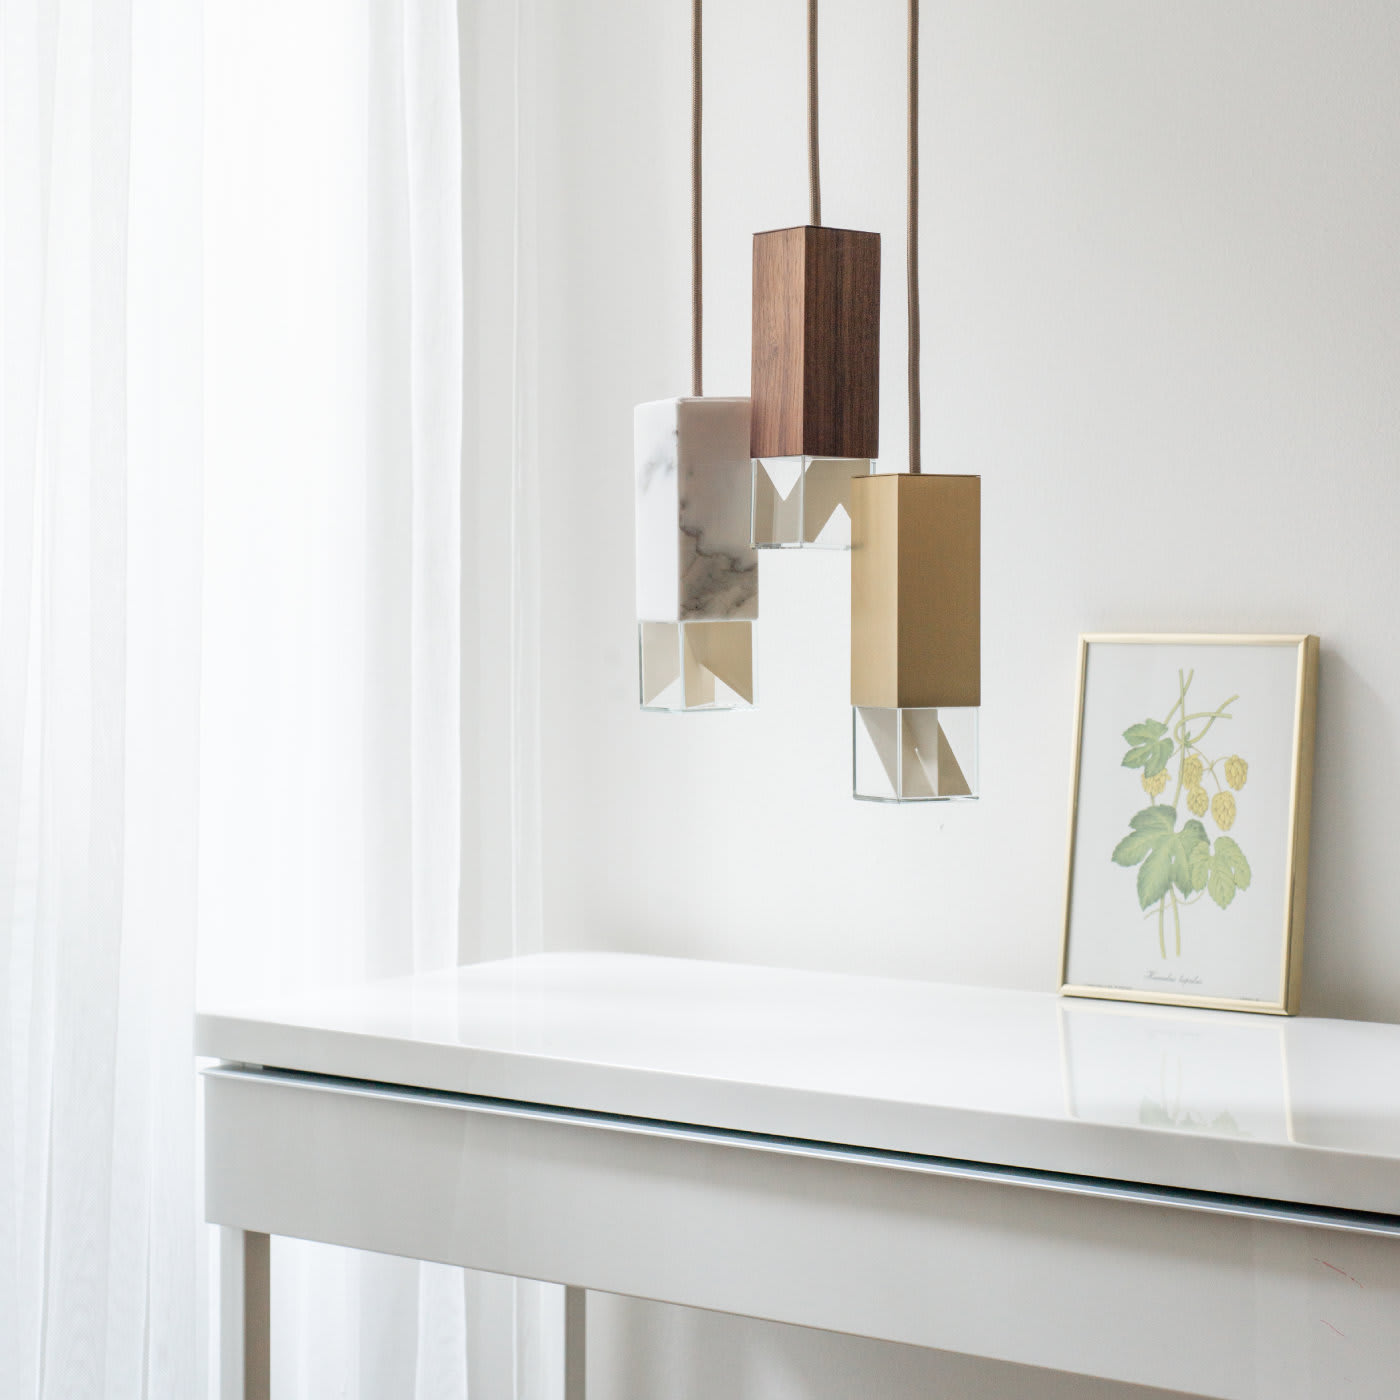 Lamp/One Collection Chandelier - Formaminima